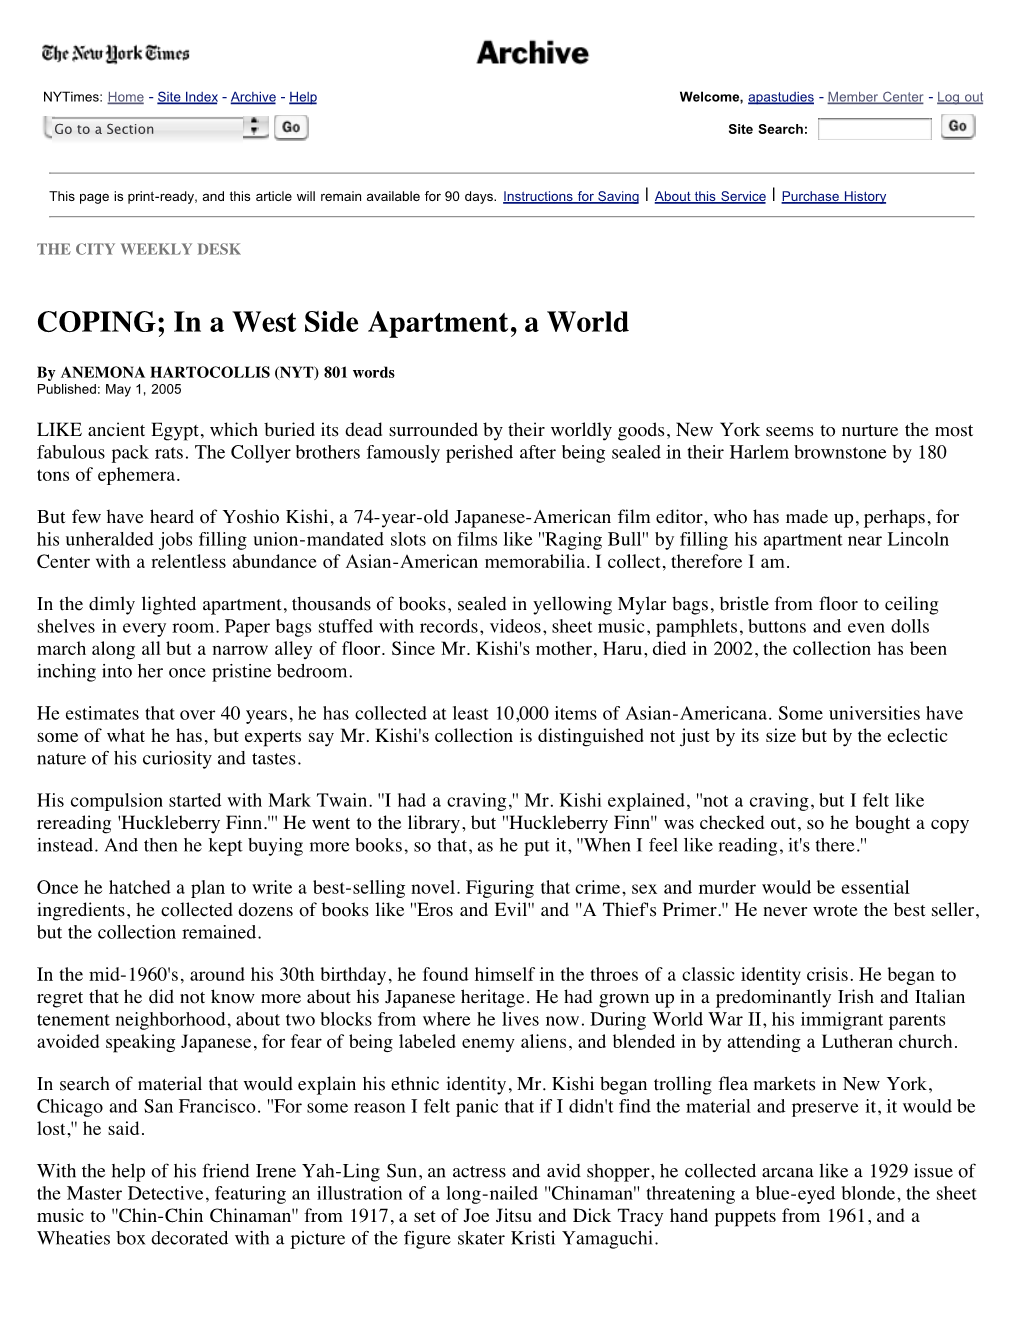 COPING; in a West Side Apartment, a World